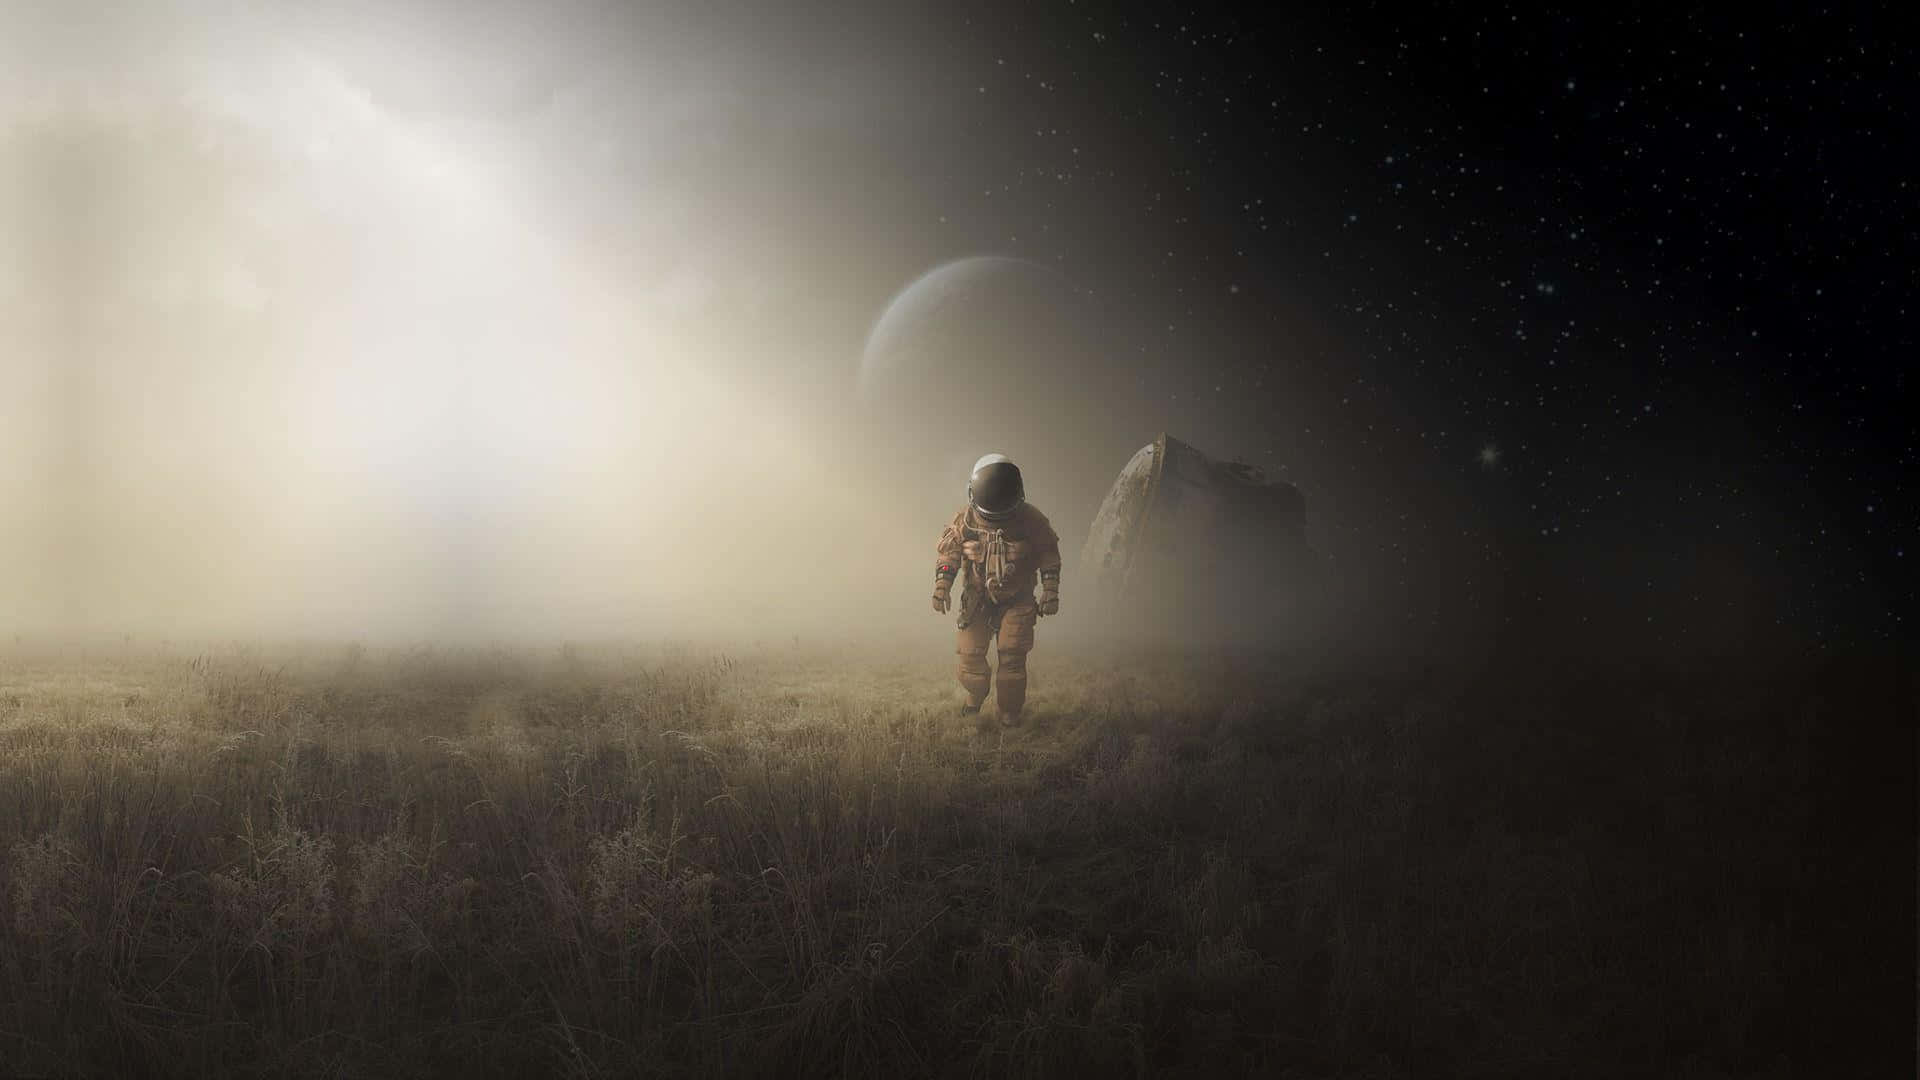 Exploring the Universe - An Astronaut in Outer Space Wallpaper